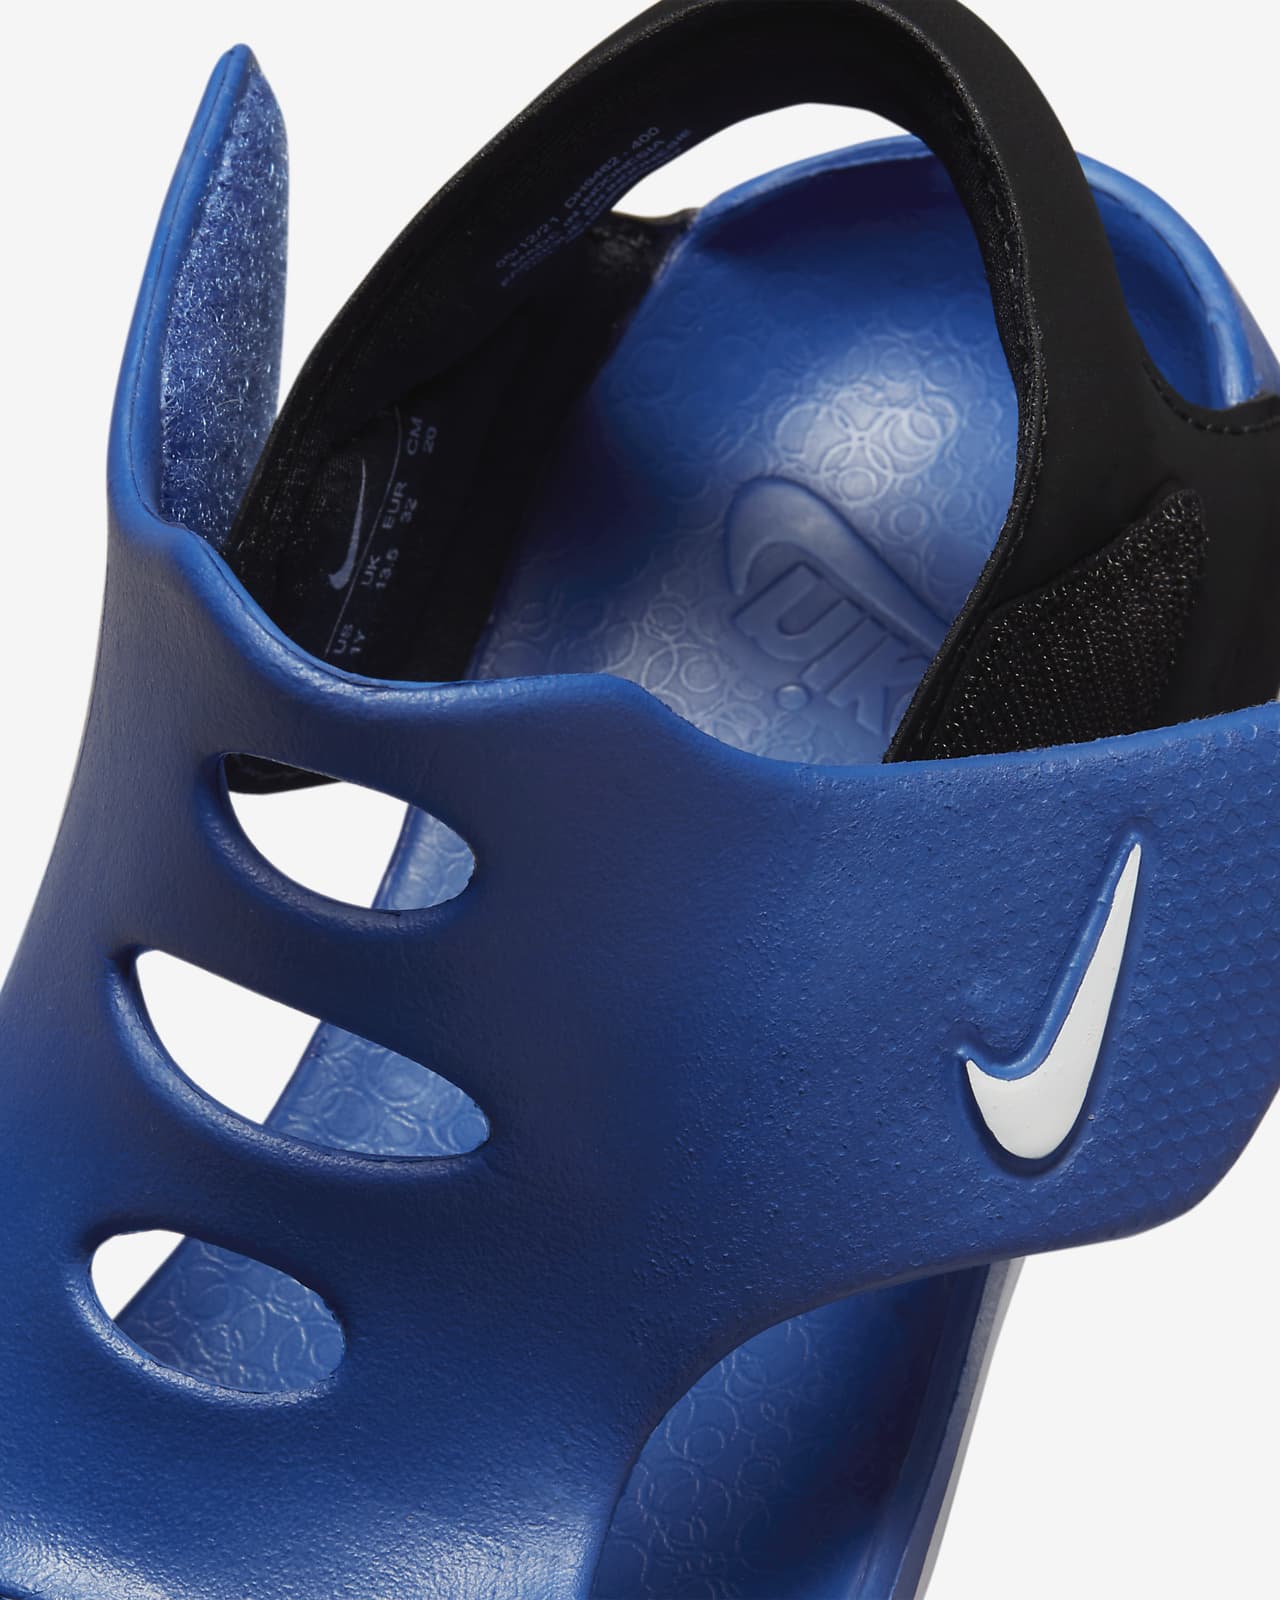 Nike Sunray Sandals. LU Protect 3 Nike Younger Kids